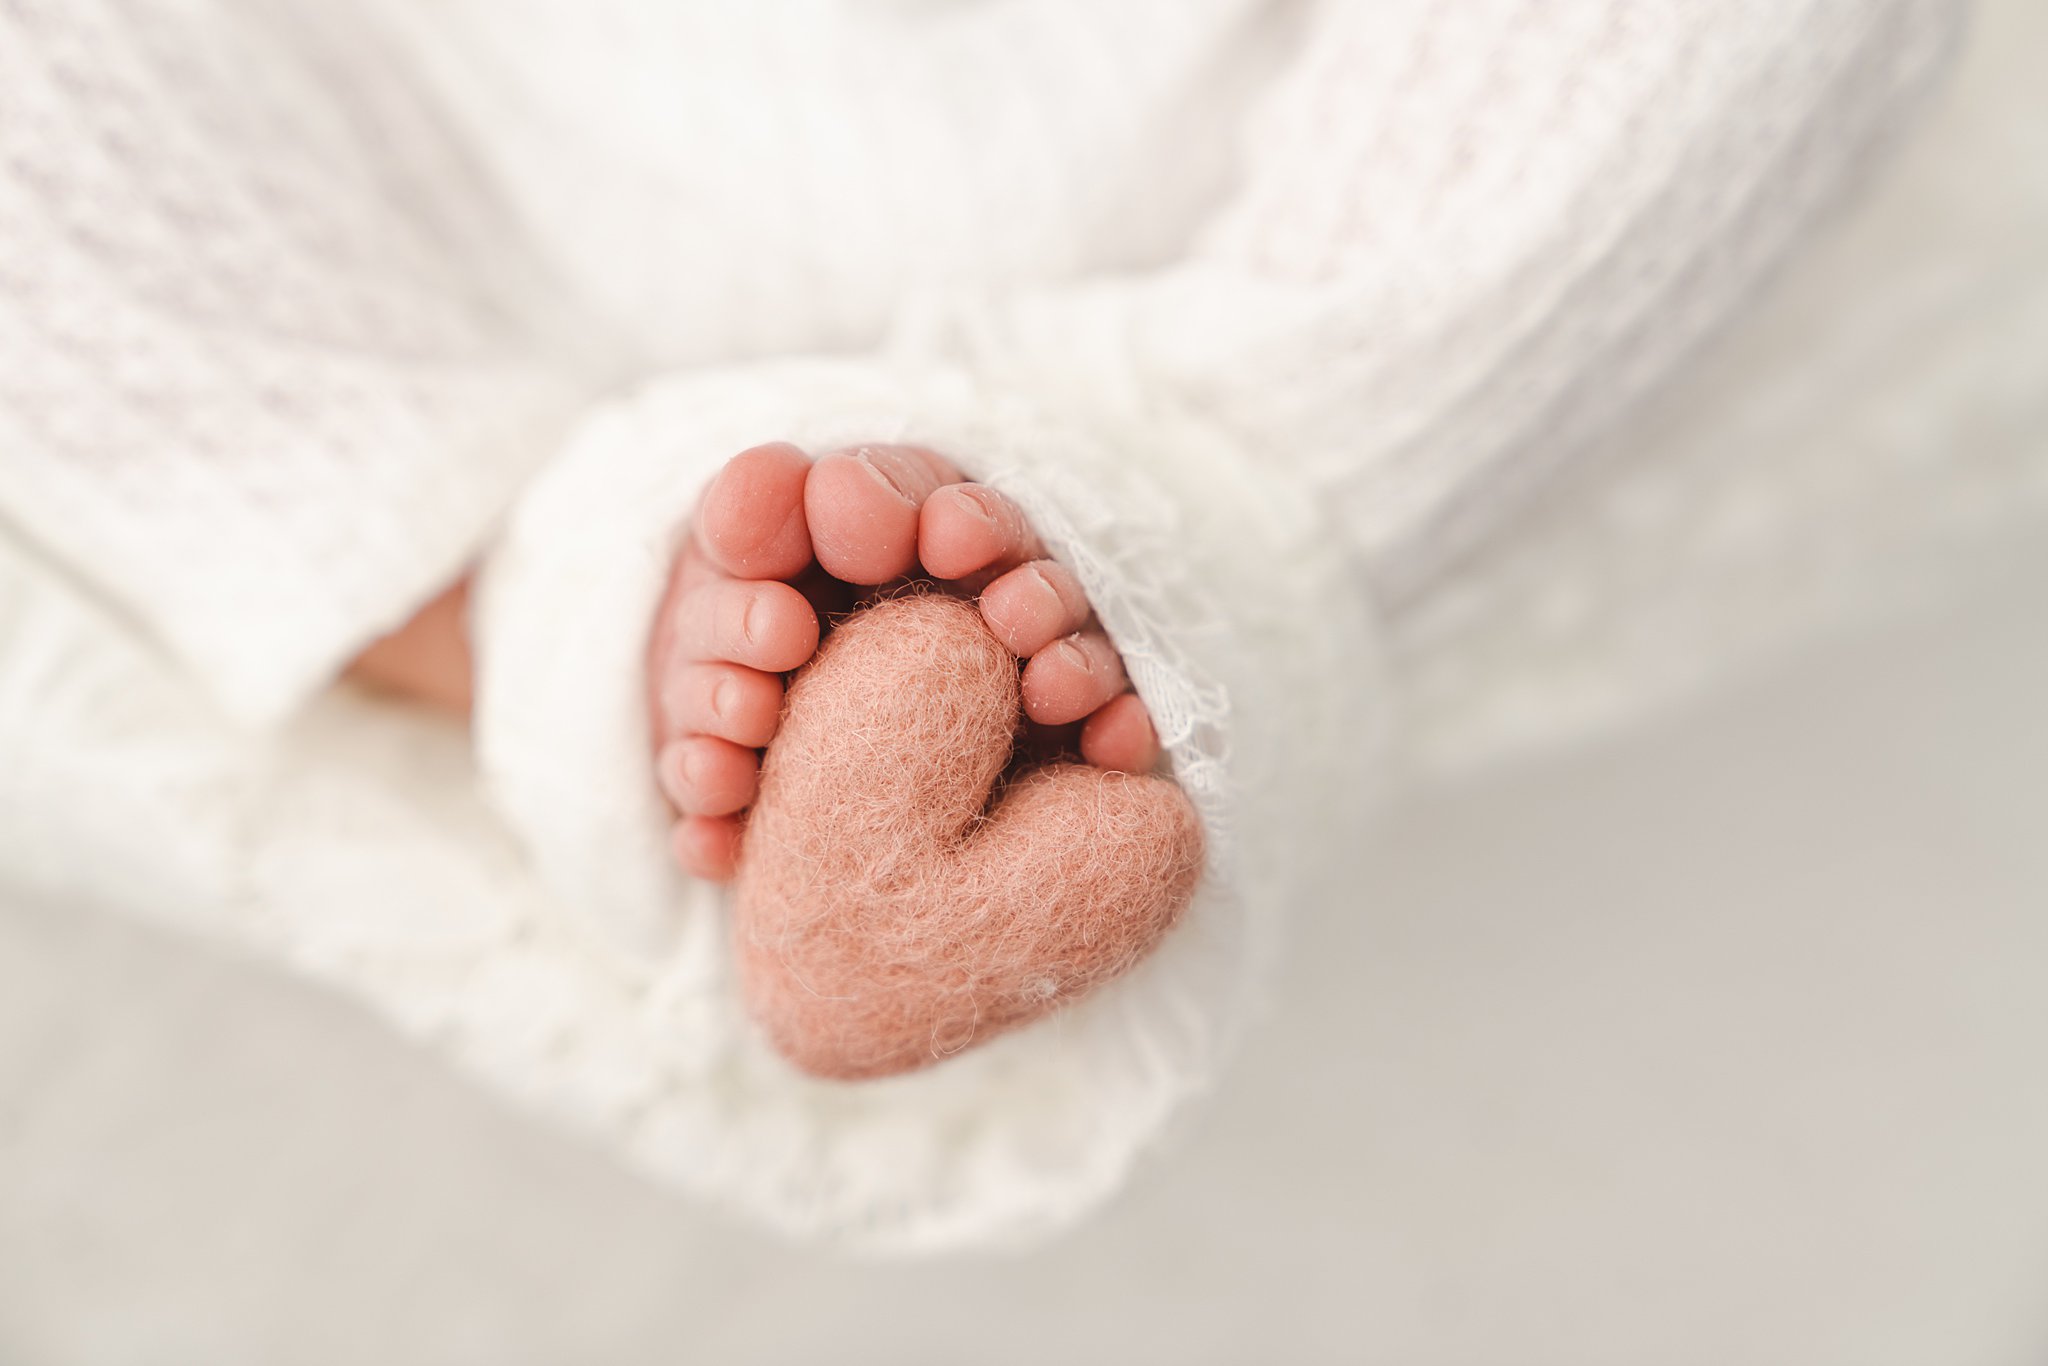 Newborn baby swaddled in a white blanket holds a felt heart with their toes Blooma minneapolis